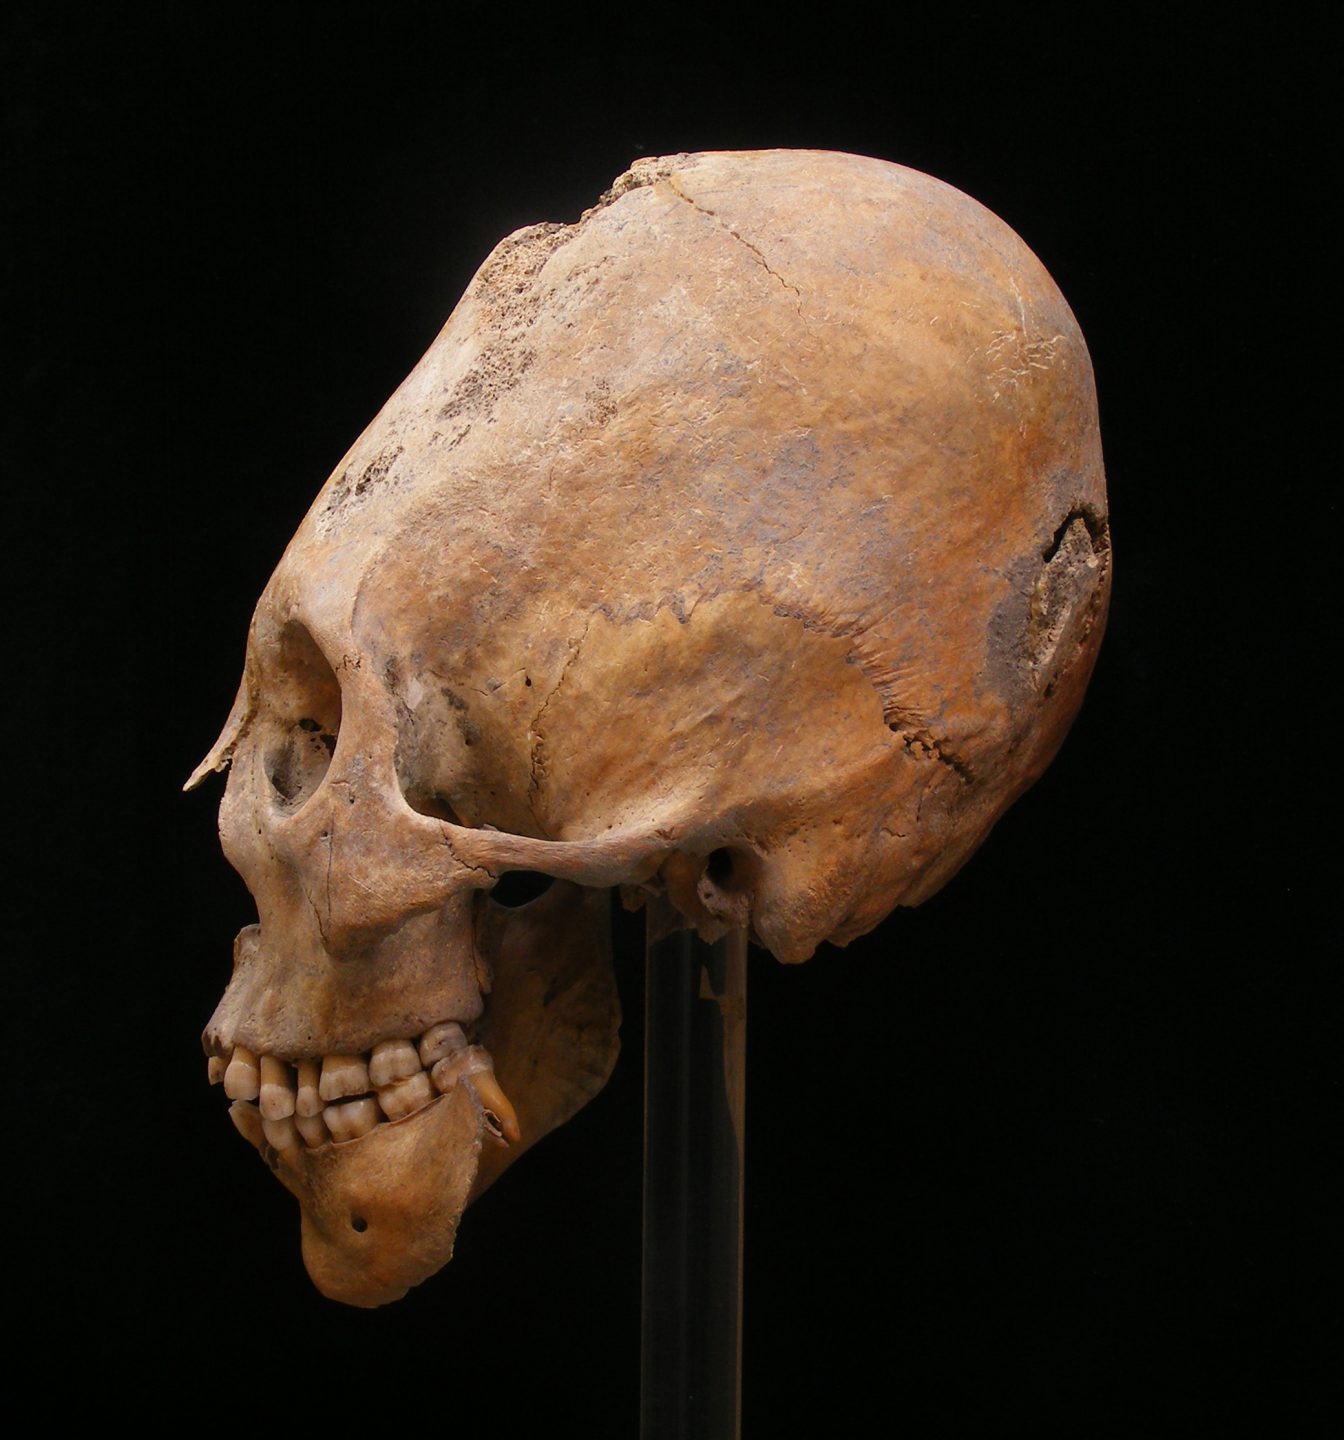 showing the modified elongated cranium the Huns achieved through binding the heads of their babies.